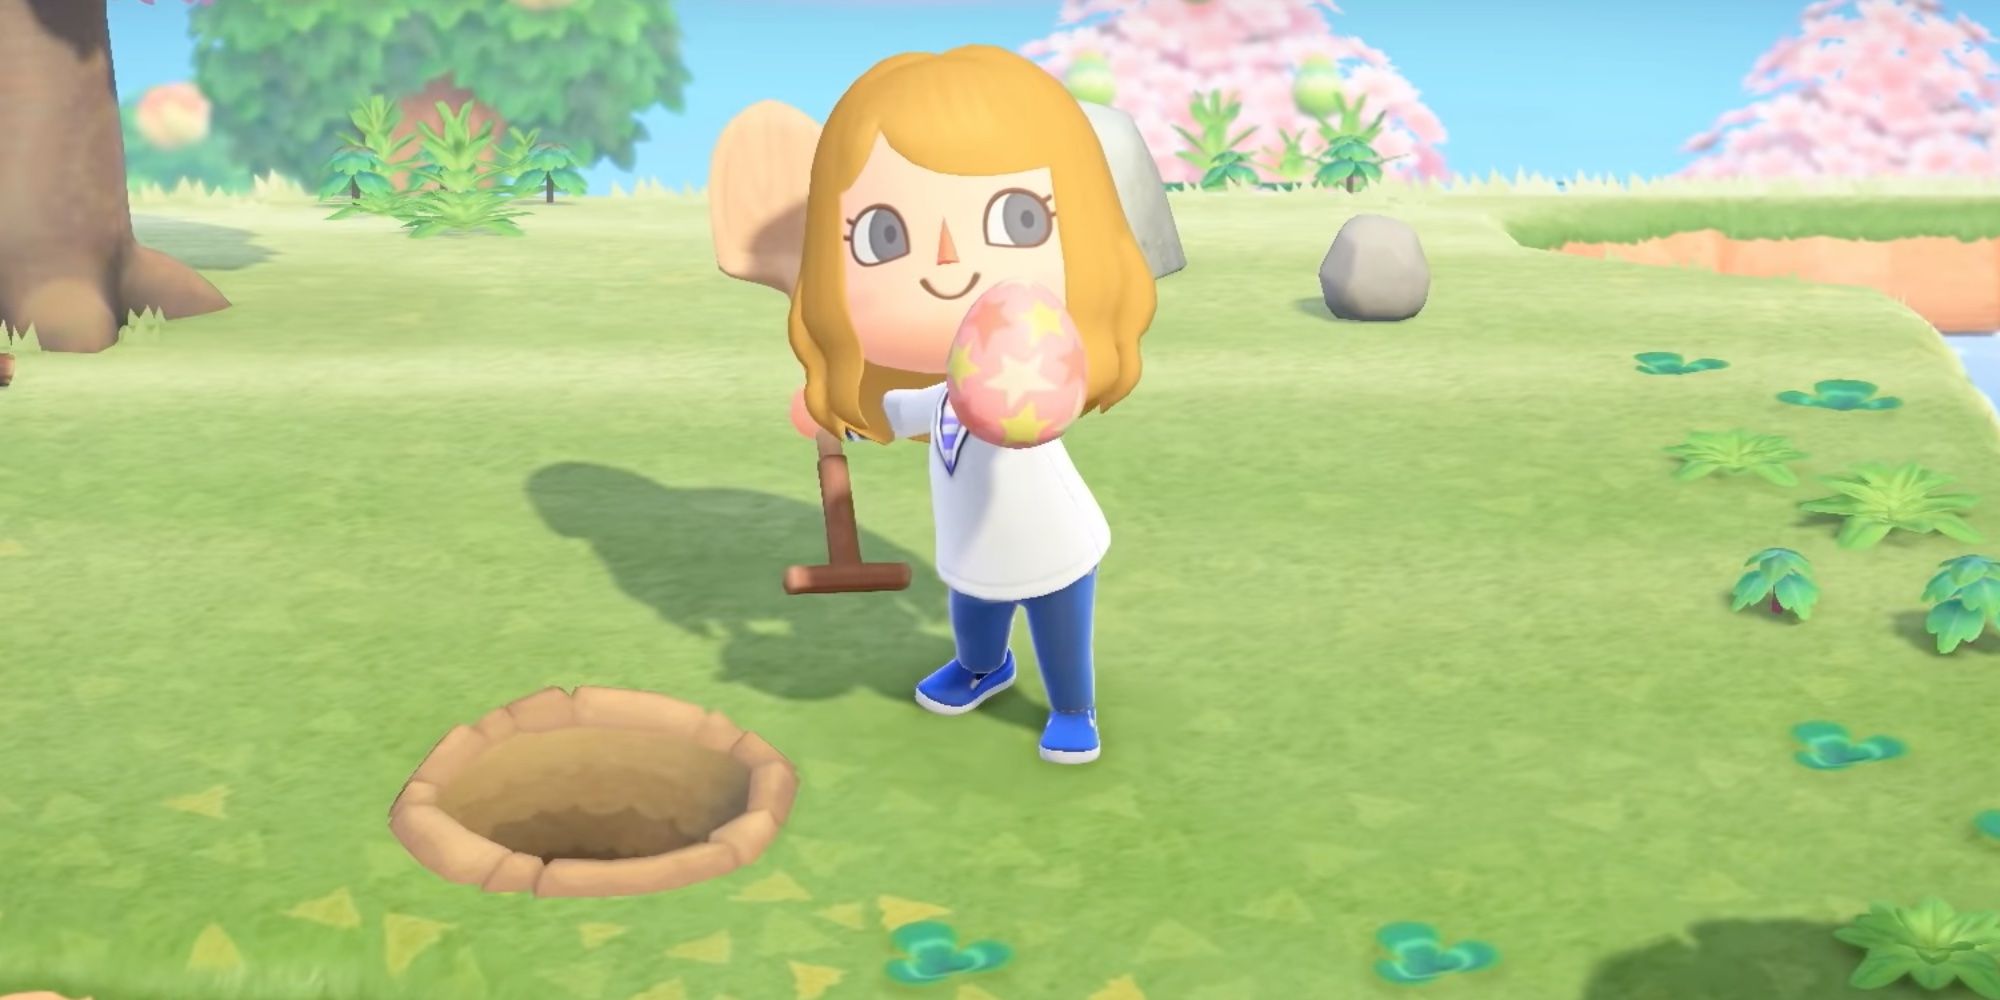 animal crossing villager finding an egg in New Horizons on Bunny Day